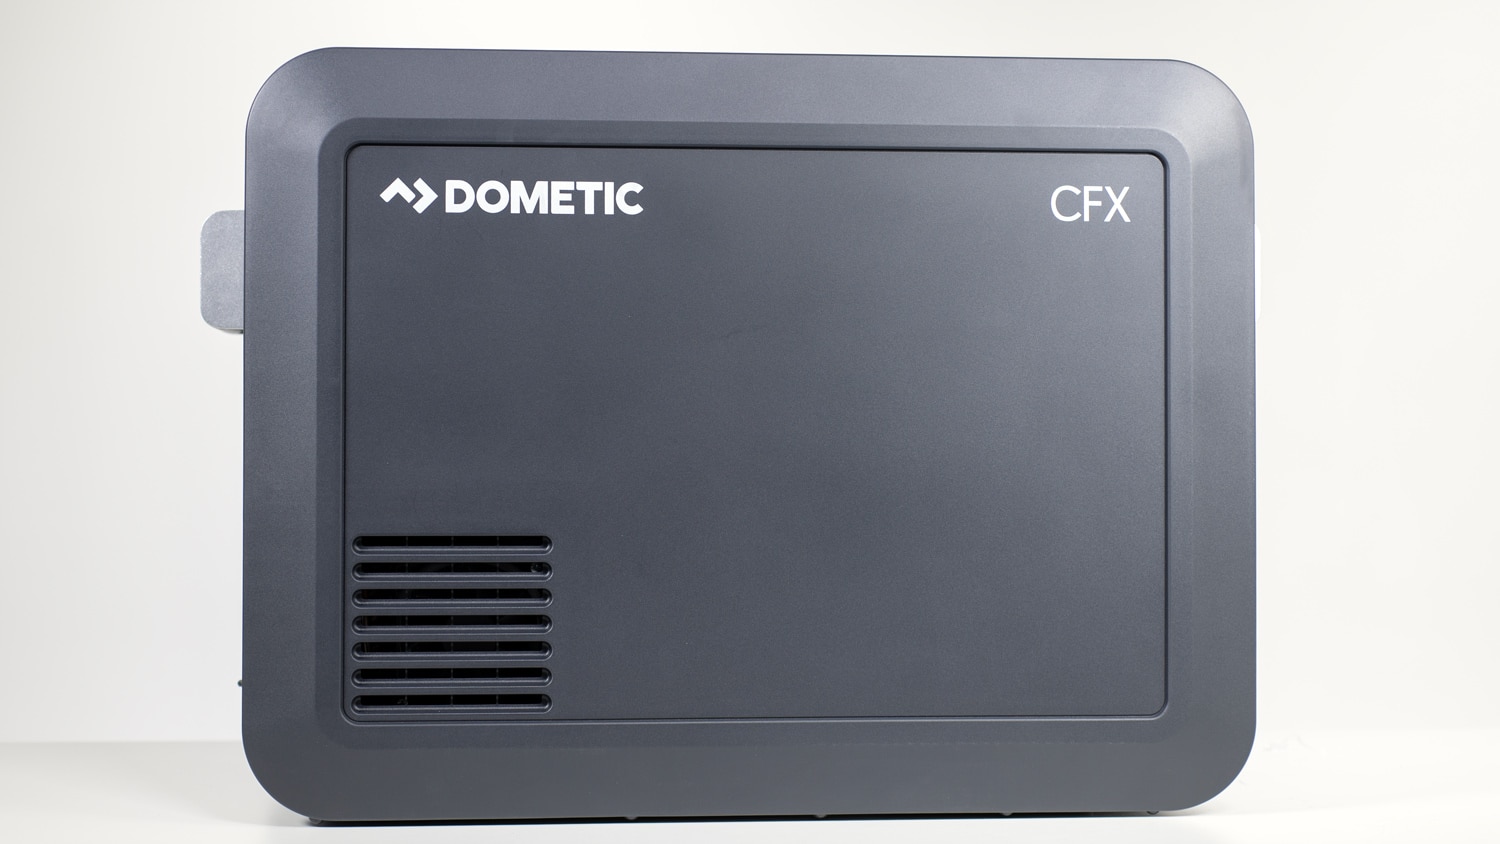 Product shot of a Dometic CFX3 cooler